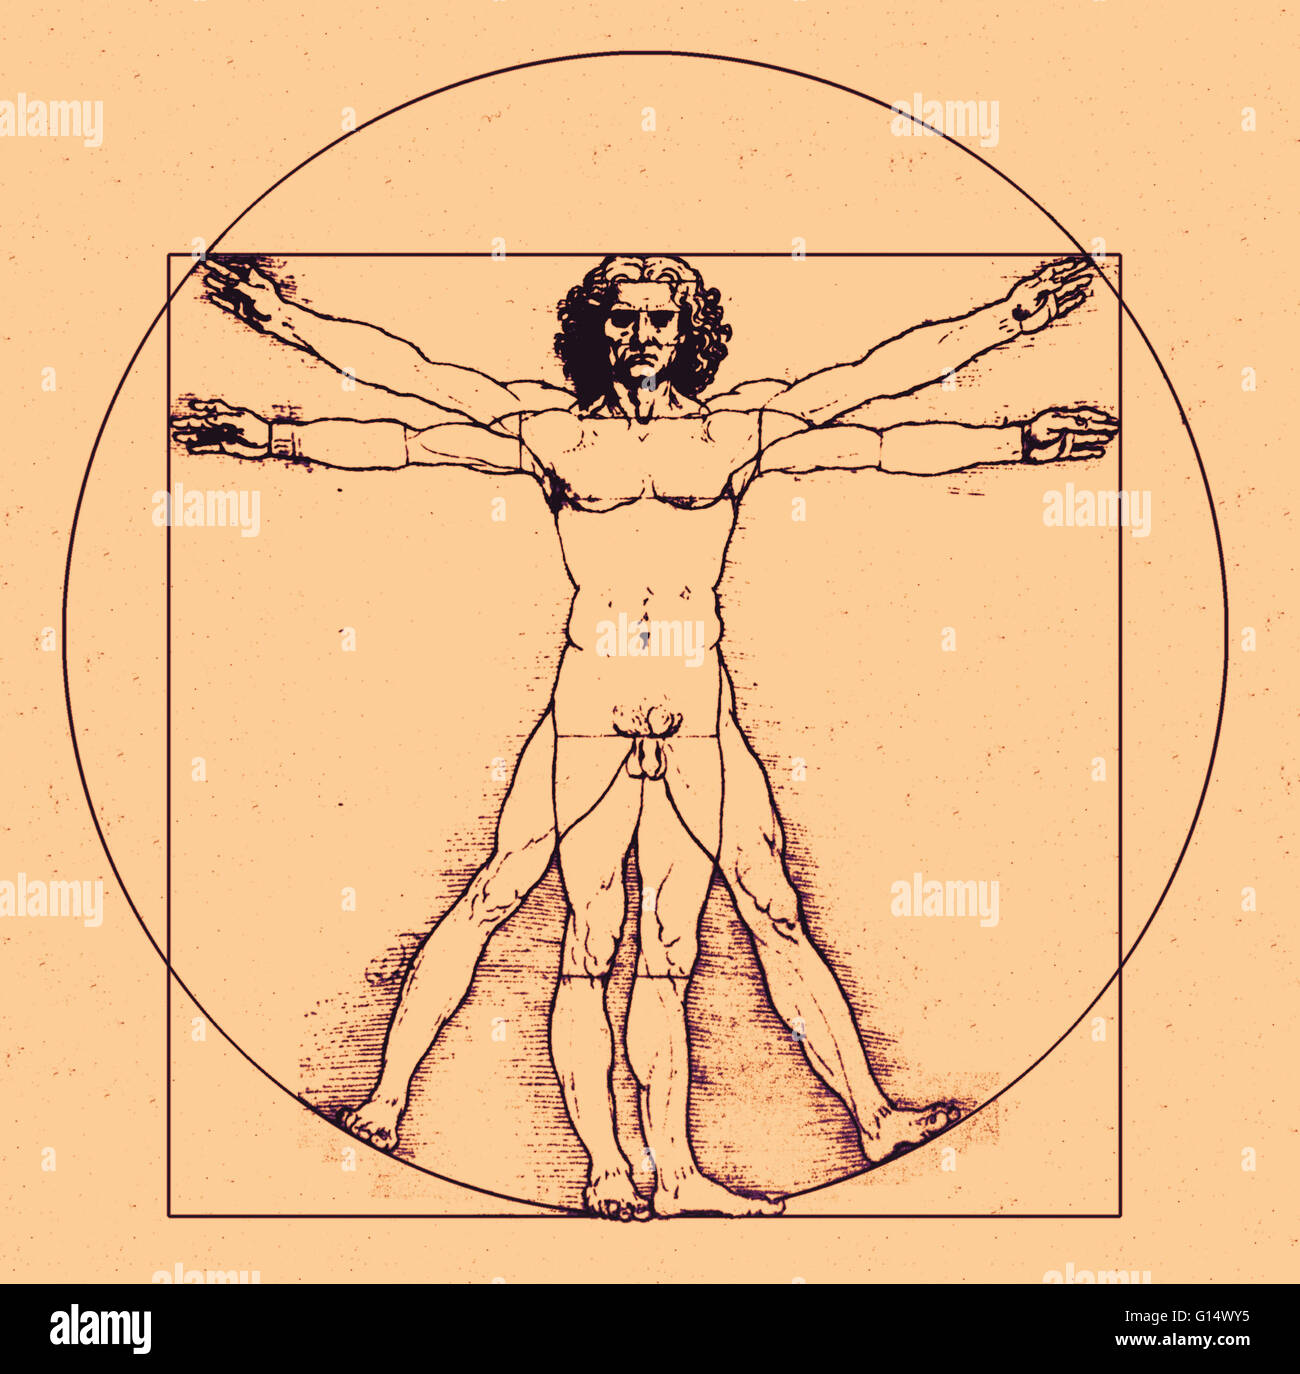 Human body. Drawing of the movement of a male human body by the Italian artist and scientist Leonardo da Vinci (1452-1519). Here, he shows how the movement of the limbs can be described on the perimeters of a circle and a square. Also shown is Leonardo's Stock Photo